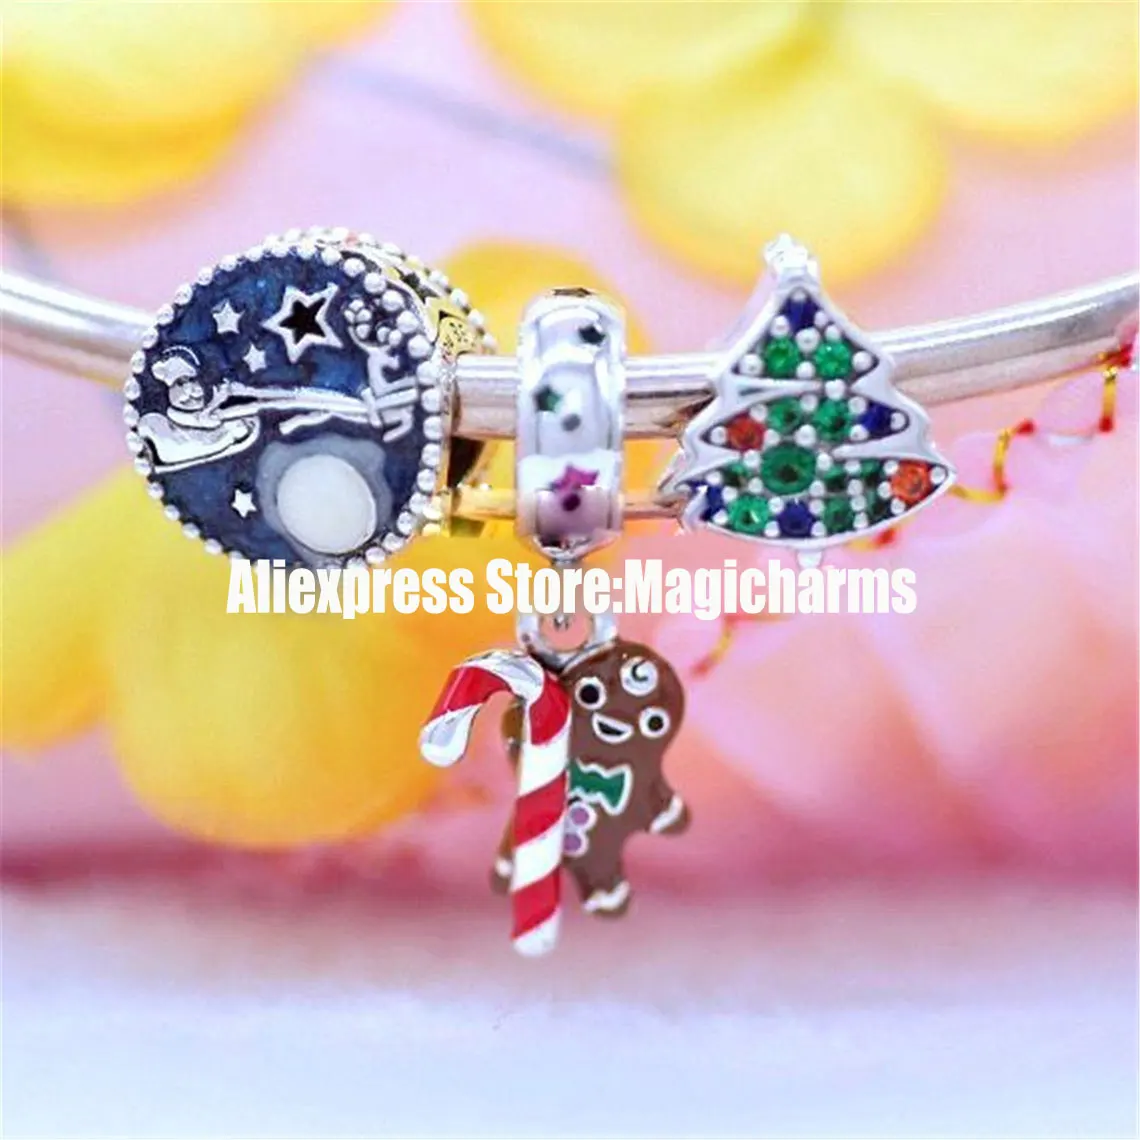 

925 Sterling Silver Santa & the Reindeer,Gingerbread Man, Christmas Tree Charms Beads Gift Set Fits All European Pandora Jewelry